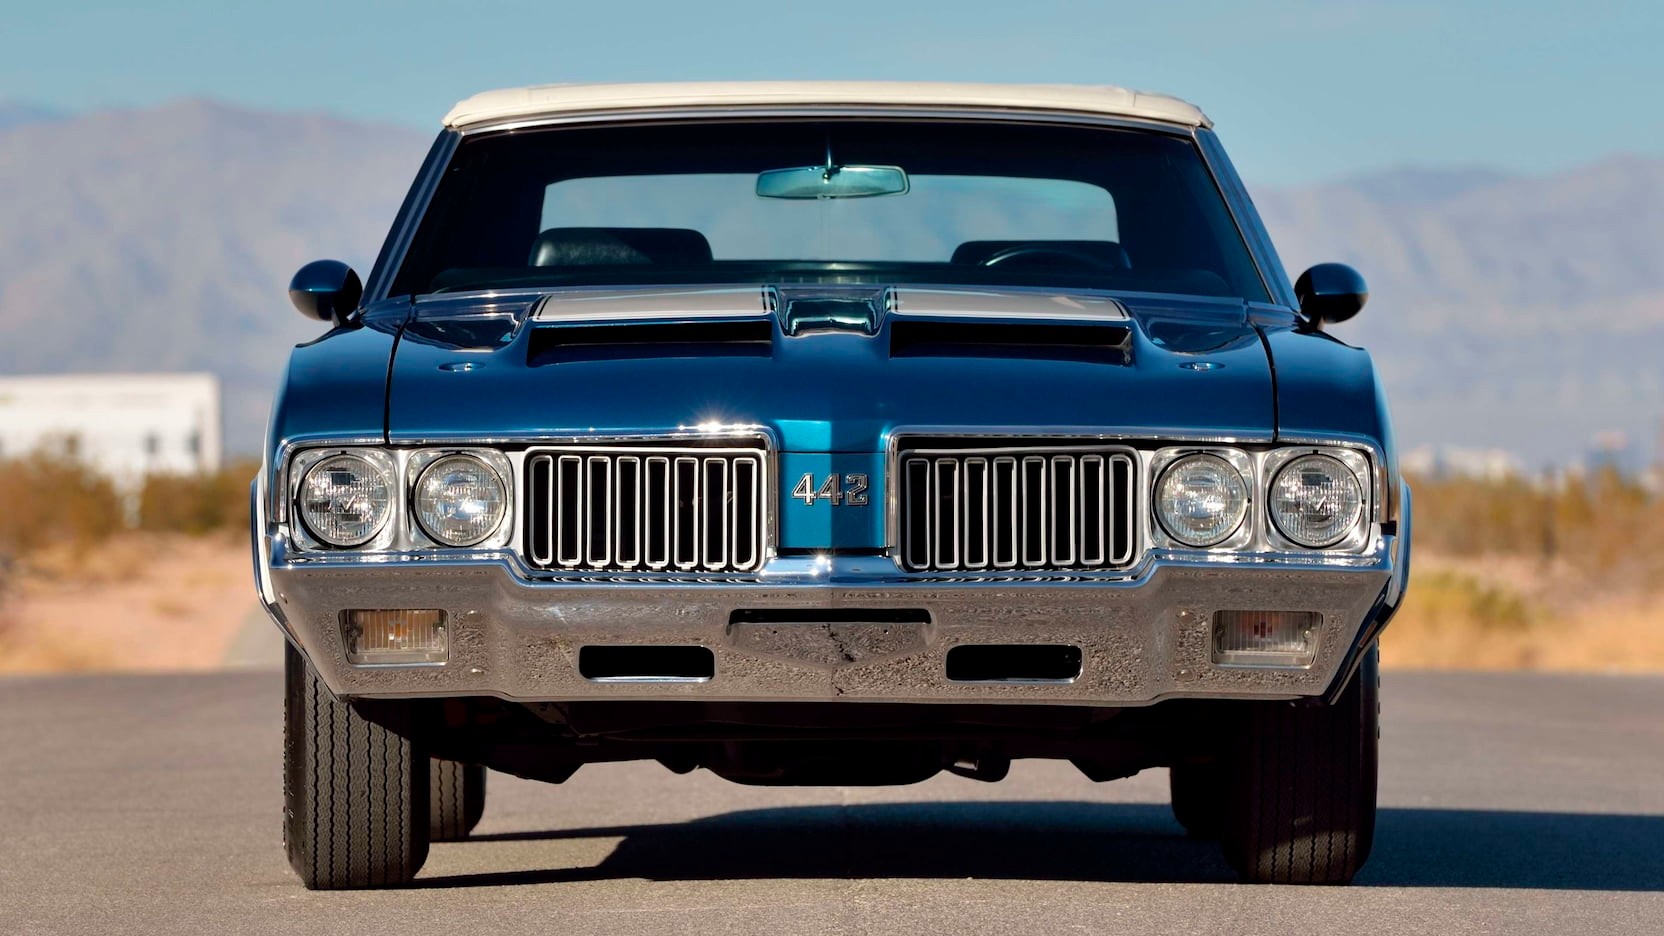 Buy This Oldsmobile 442 W 30 Convertible And Hear 7 5 Liters Of American Muscle Sing Carscoops